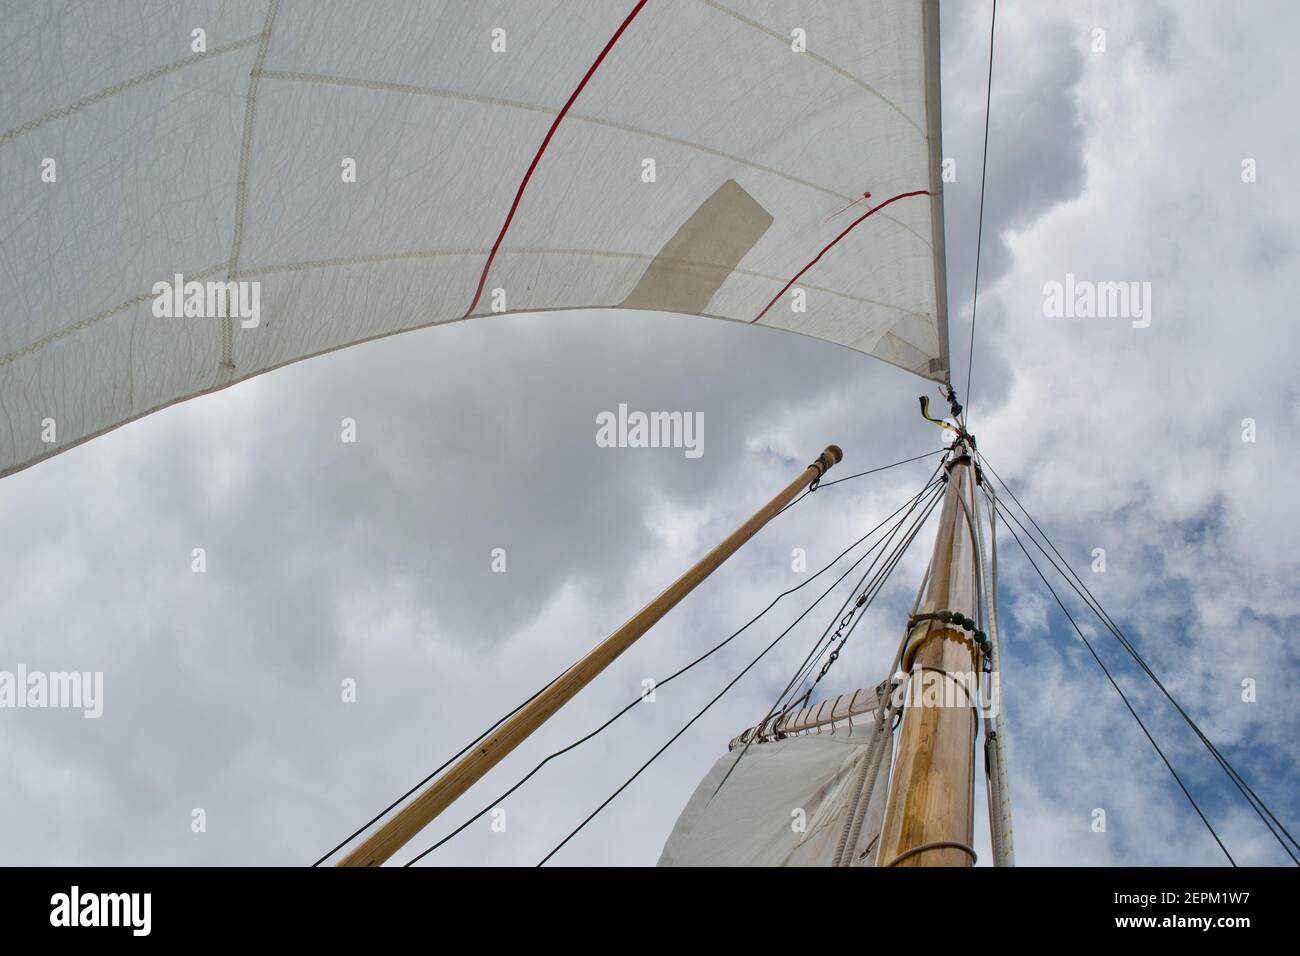 Looking up the mast of a gaff rigged sailing yacht: white sails, wooden mast and gaff, rope shrouds, halyards and sheets, and blue cloudy sunny sky Stock Photo